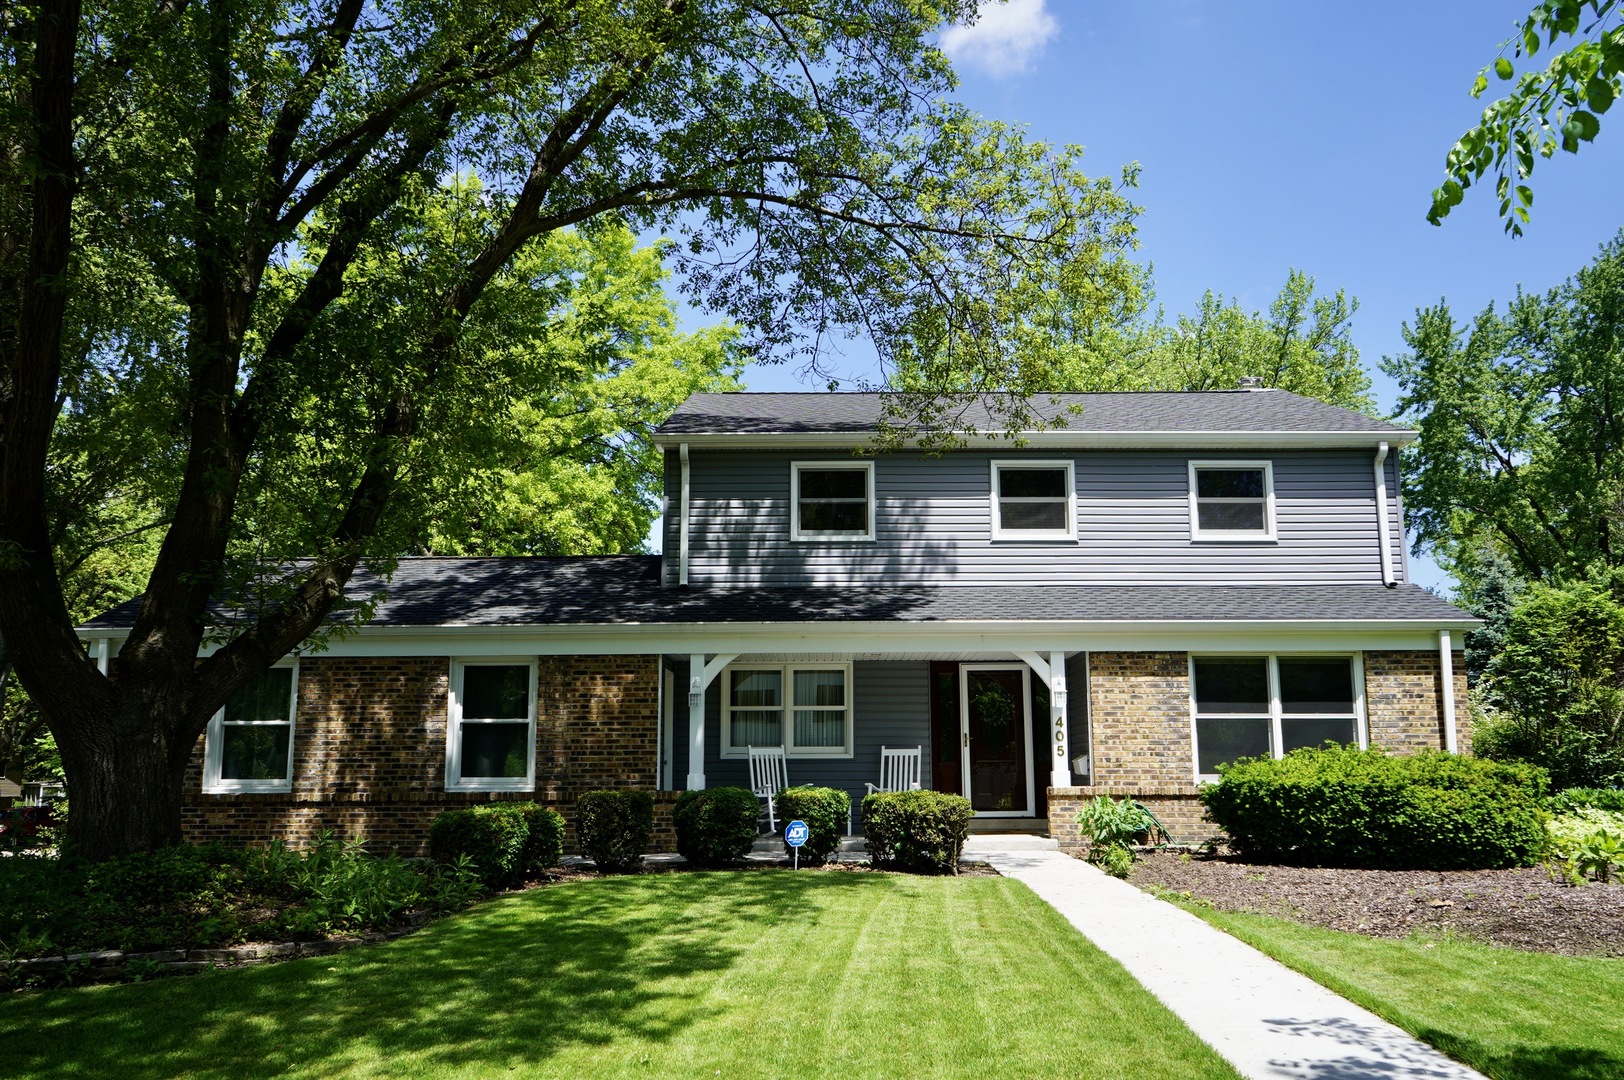 405 BAYBERRY Lane,Naperville,IL-2384-0